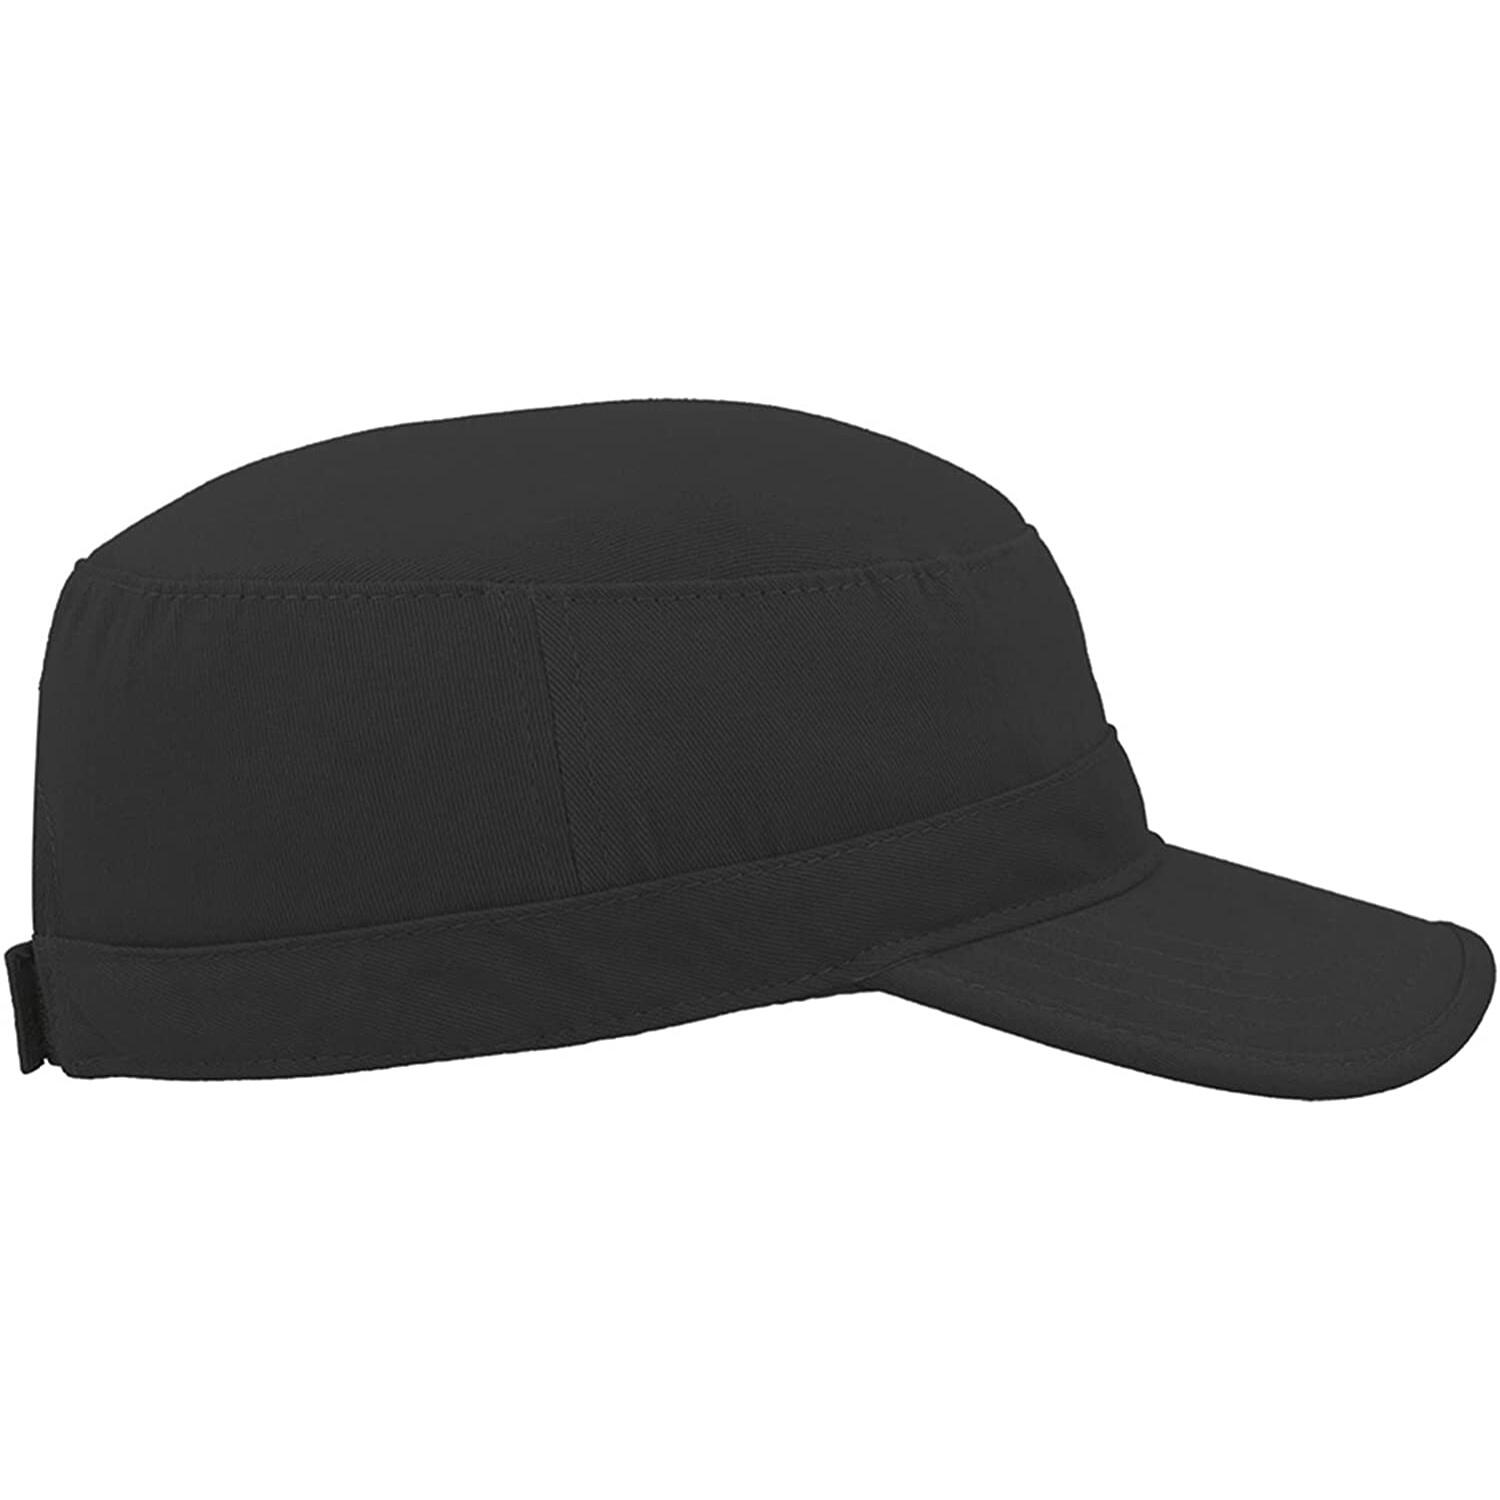 Tank Brushed Cotton Military Cap (Pack of 2) (Black) 4/4